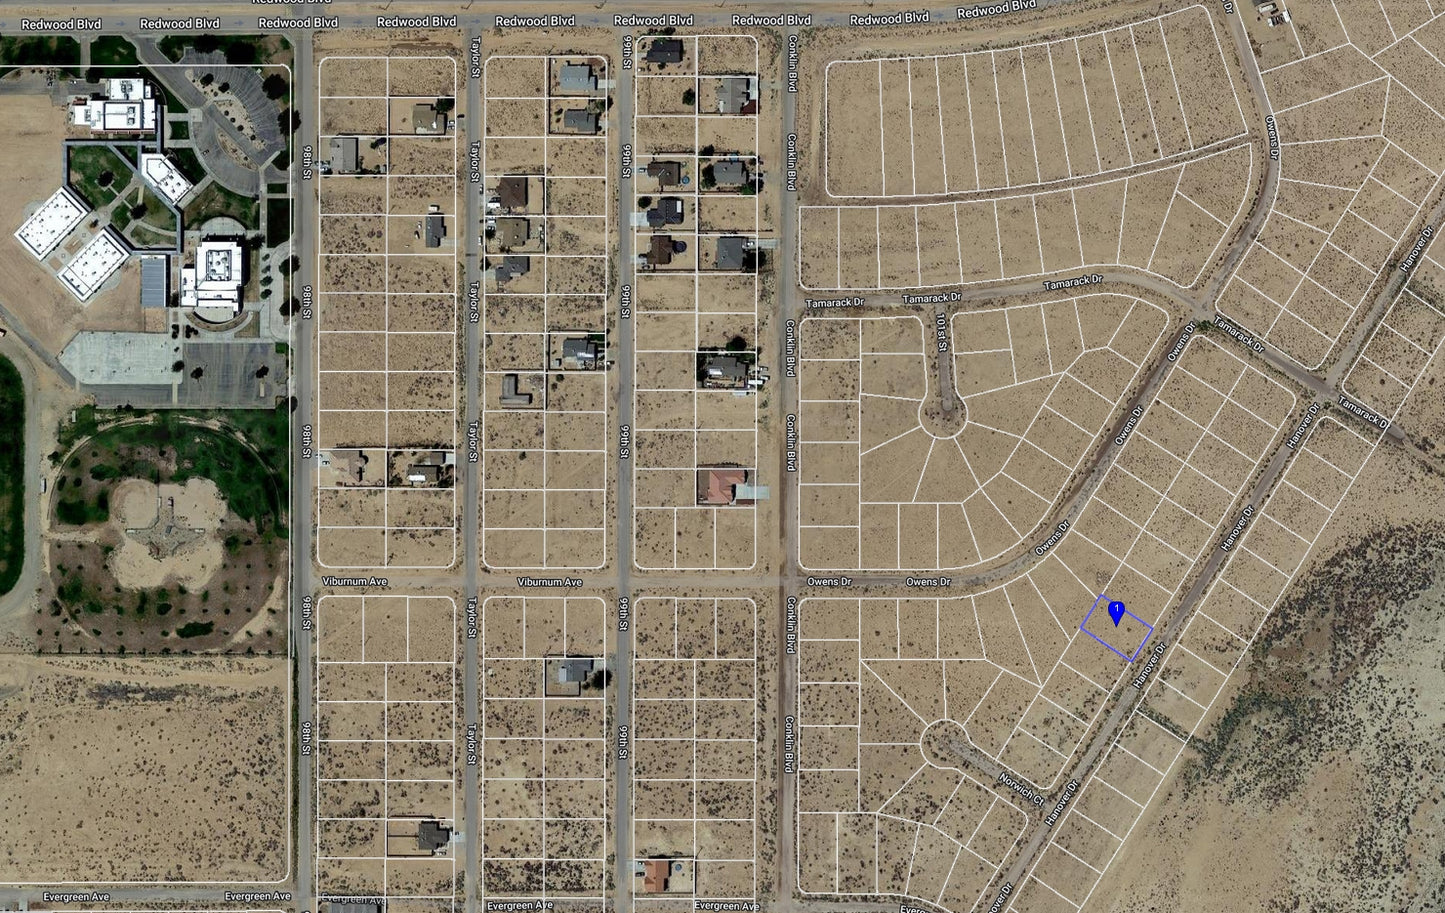 #L40082-1 .23 Acre Residential lot in California City, Kern County, CA $8,999.00 ($137.61/Month)